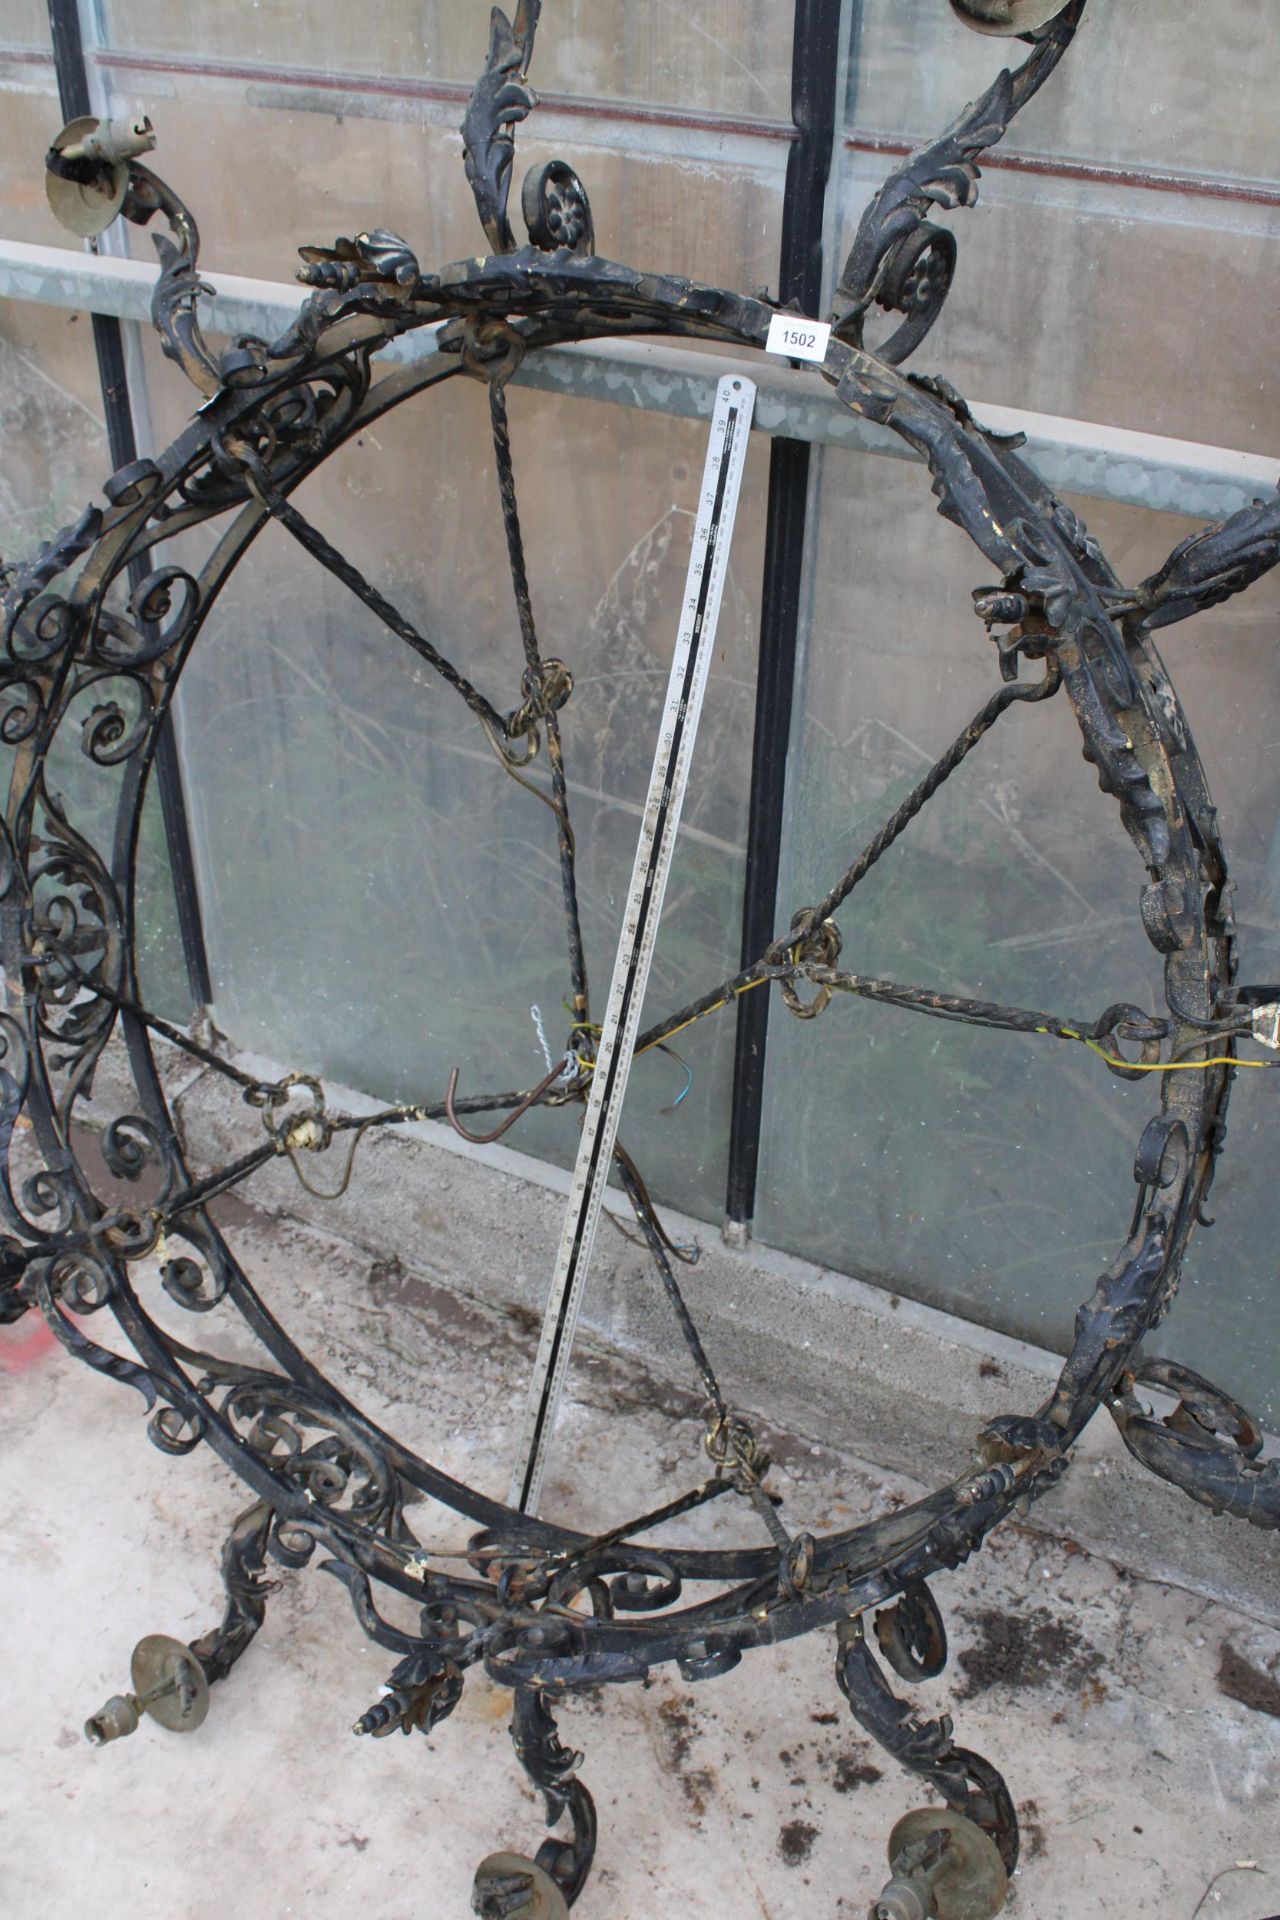 A LARGE HEAVY WROUGHT IRON 12 BRANCH CEILING LIGHT FITTING WITH HANGING BARS (D:146CM) - Image 2 of 4